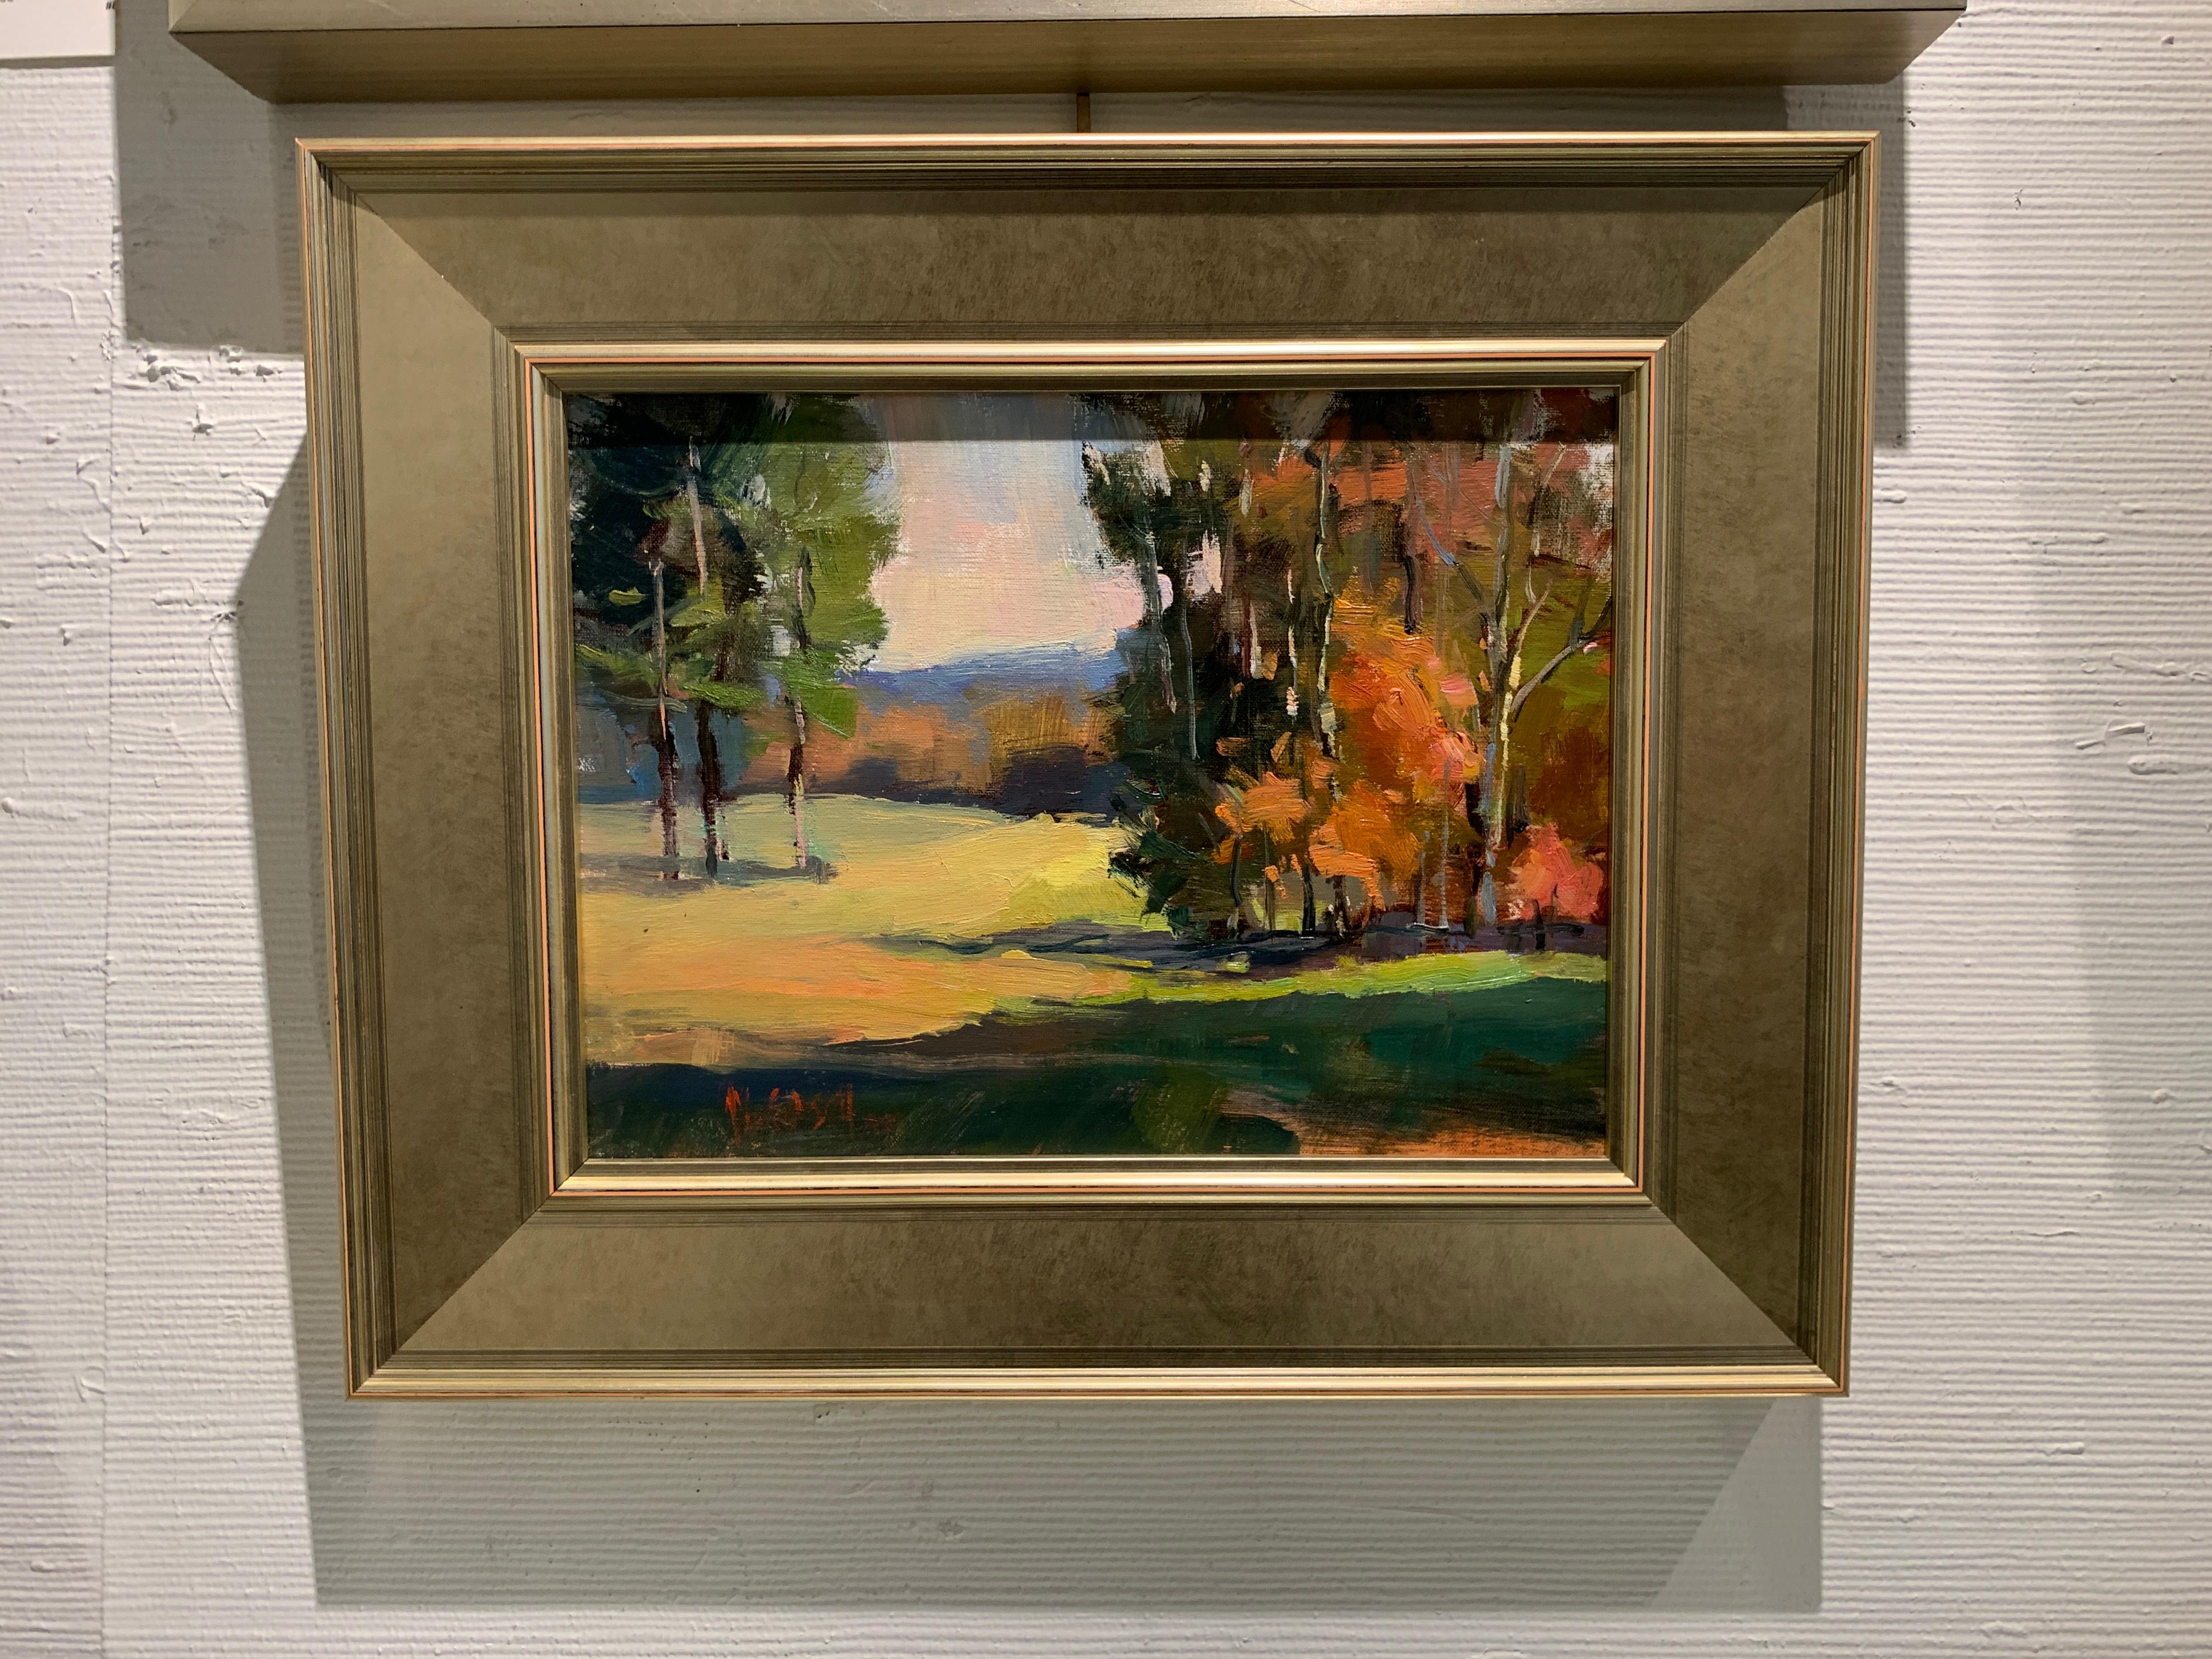 Back and Forth by Millie Gosch, Framed Impressionist Landscape Painting 1